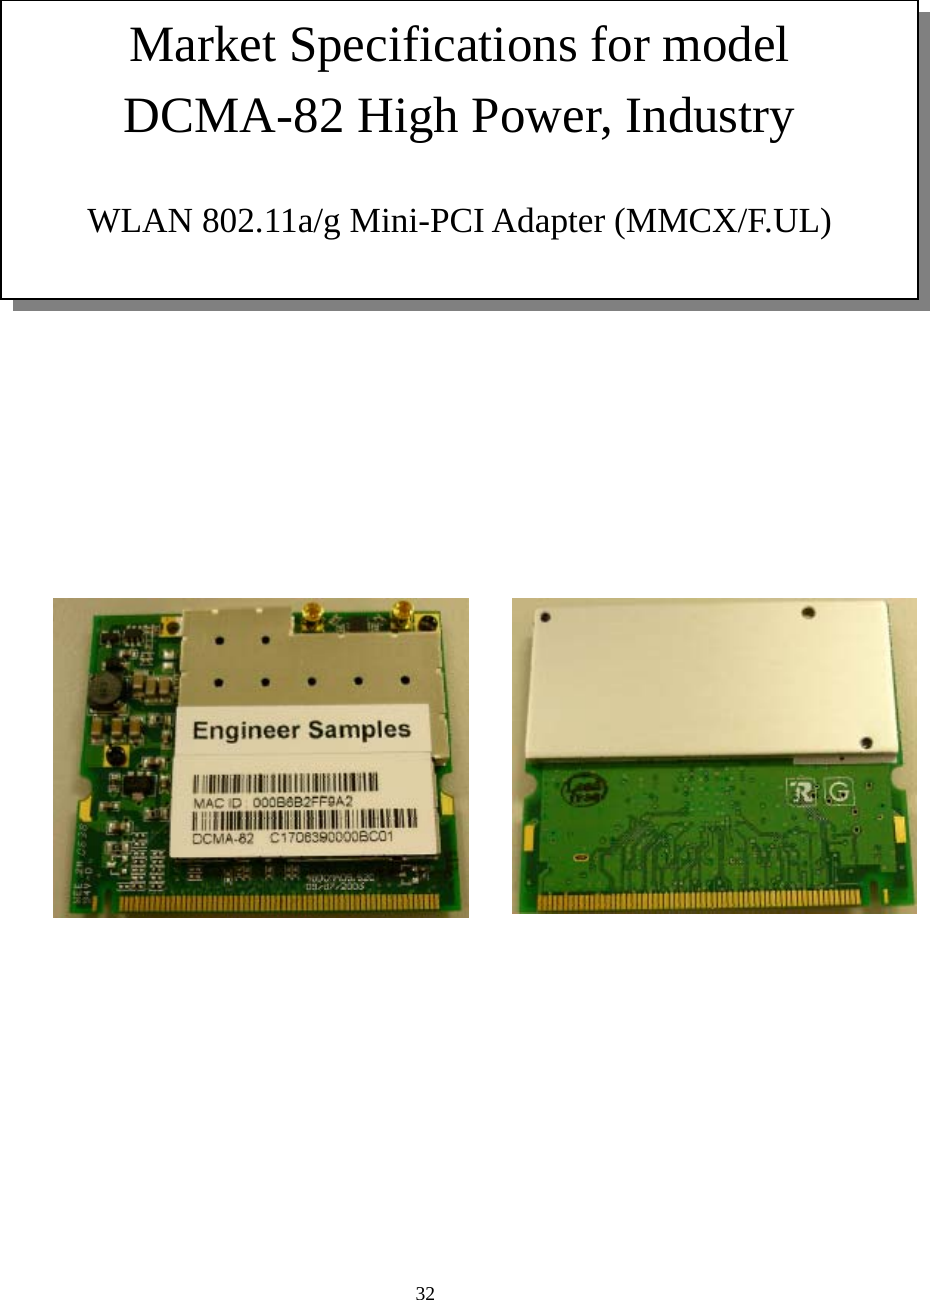  32                             Market Specifications for model   DCMA-82 High Power, Industry  WLAN 802.11a/g Mini-PCI Adapter (MMCX/F.UL) 